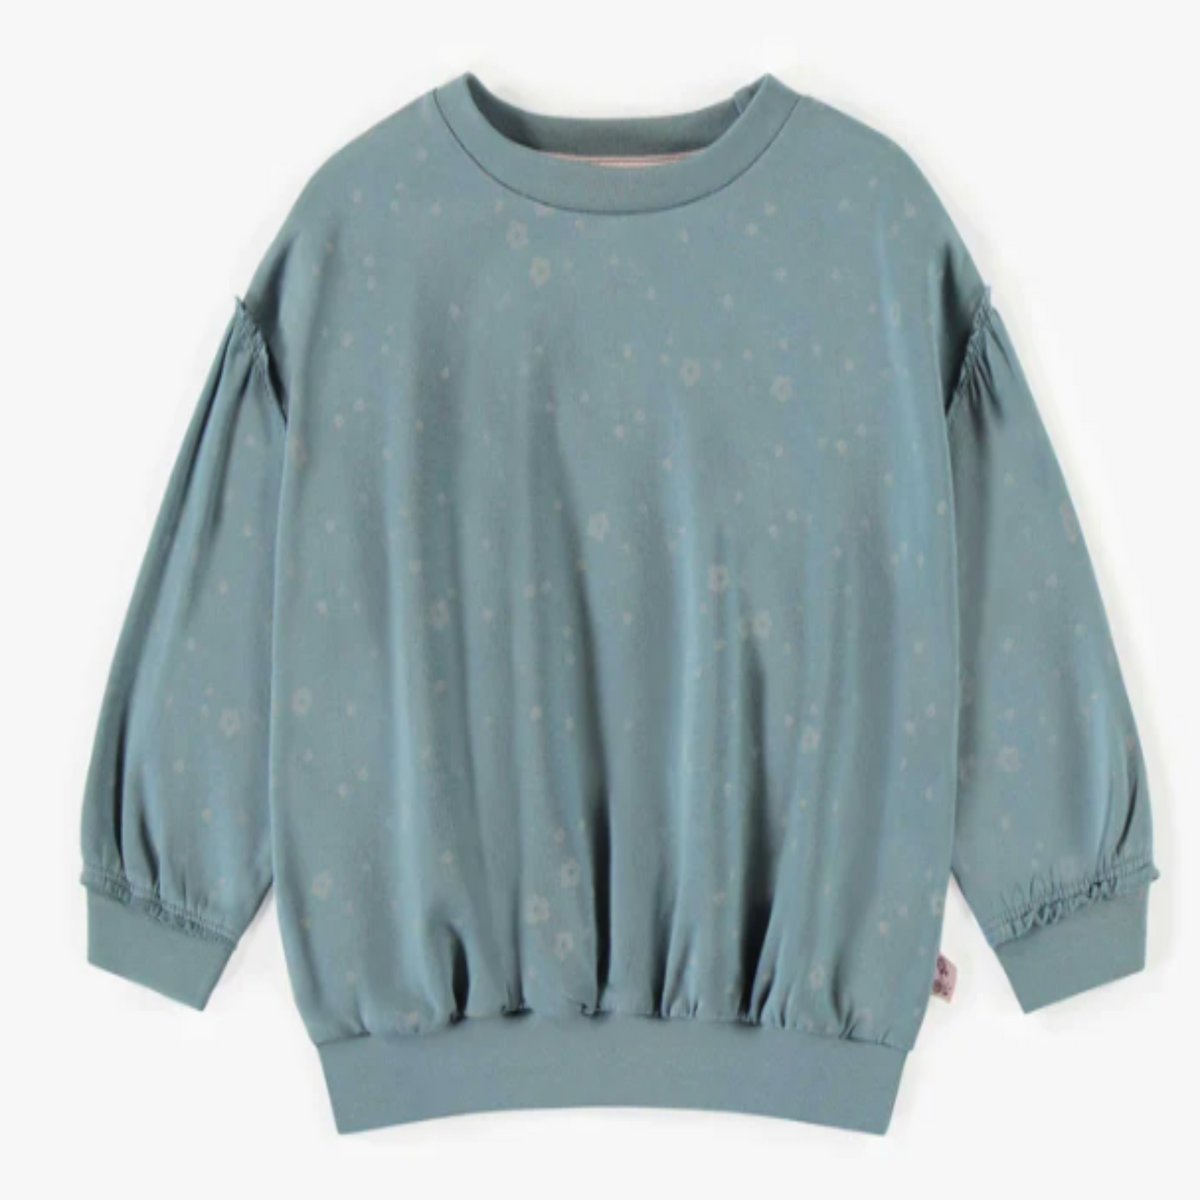 Blue crewneck with little tone on tone flowers in stretch french cotton, baby